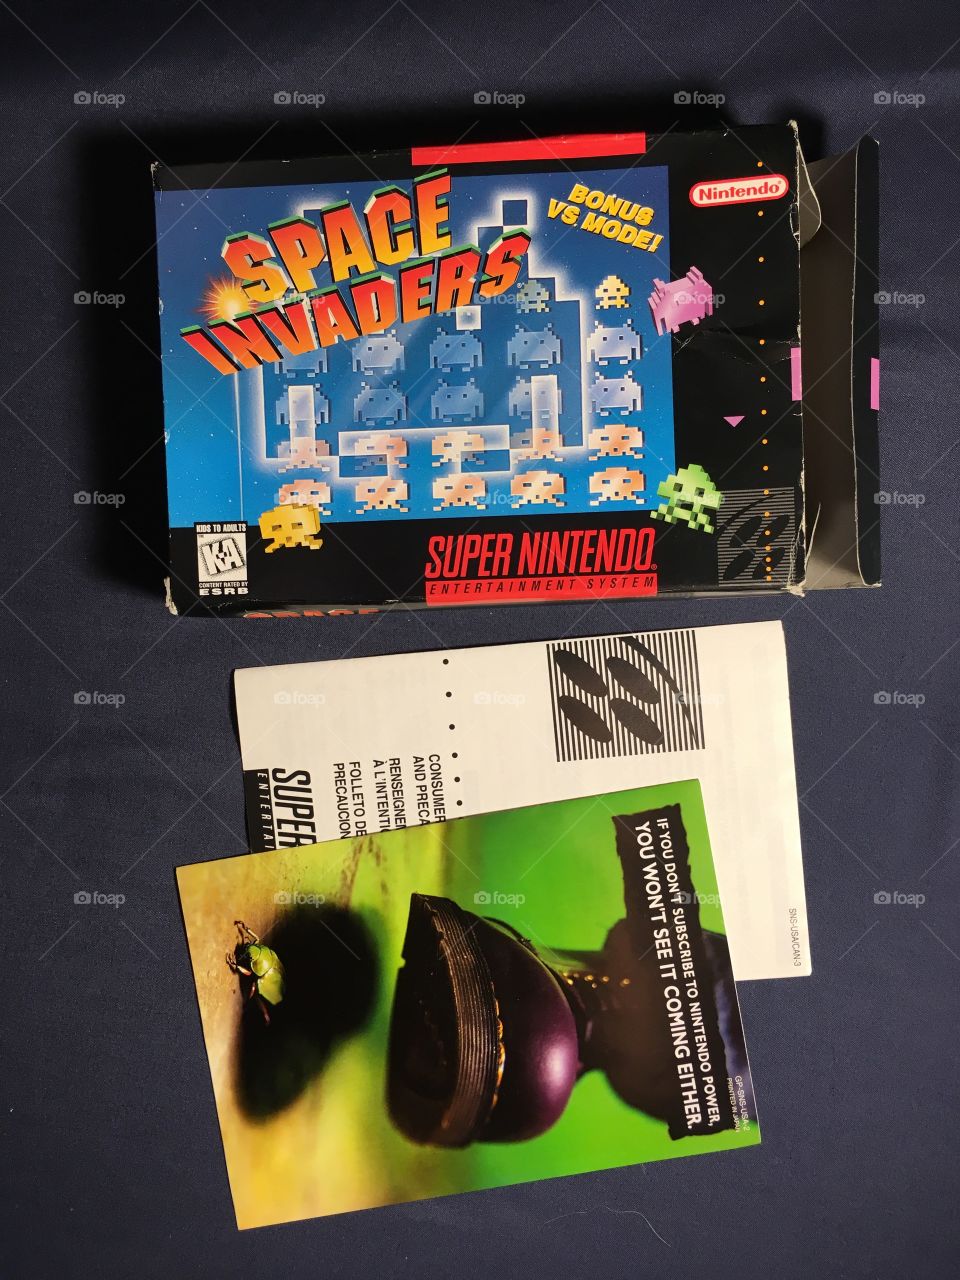 Space Invaders video game box set for the Super Nintendo Snes released in 1997